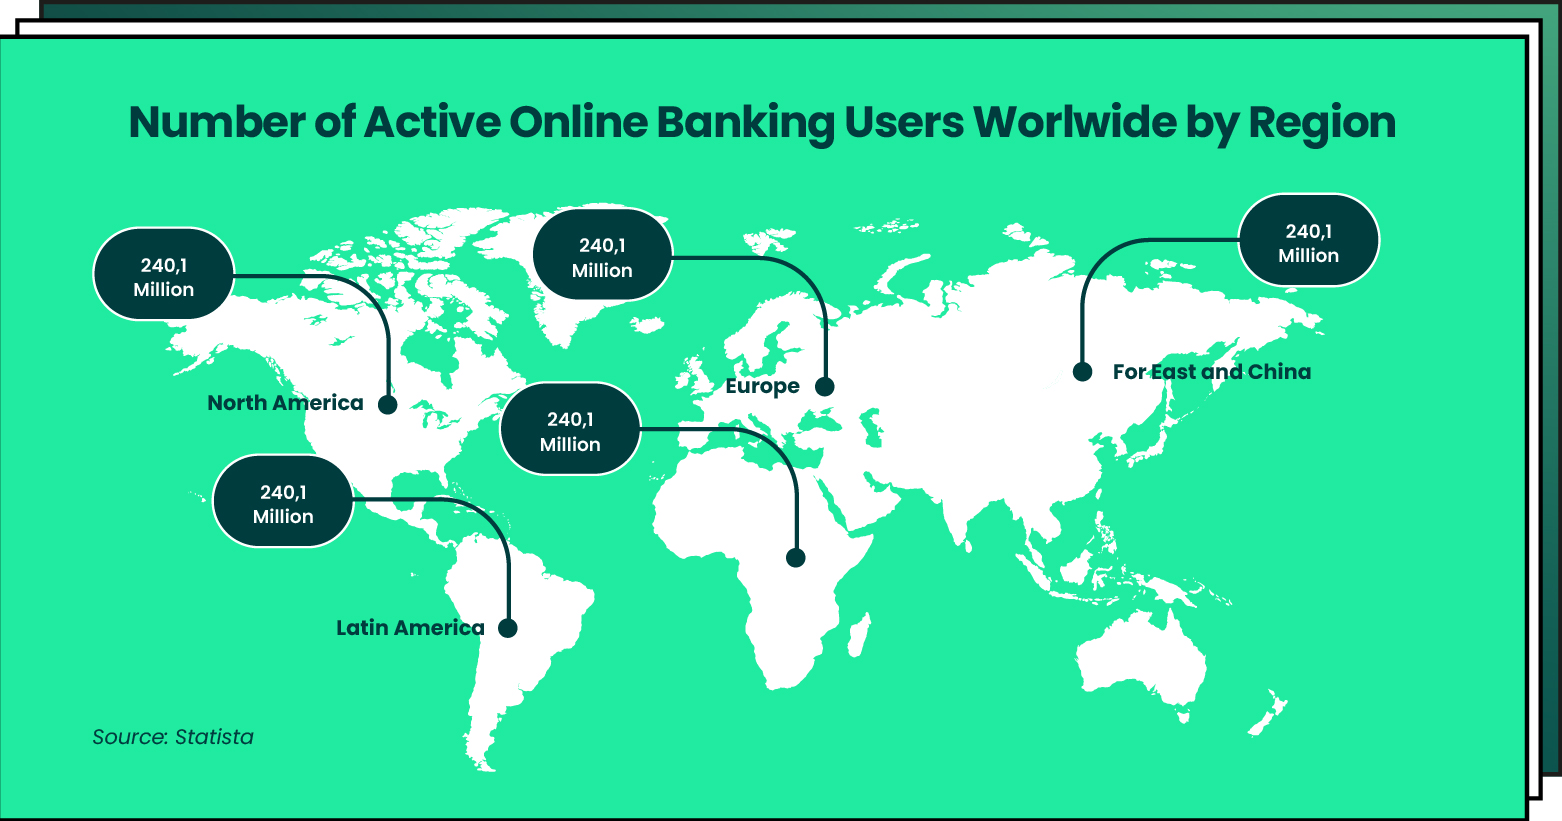 Number of Active Online Banking Users Worldwide